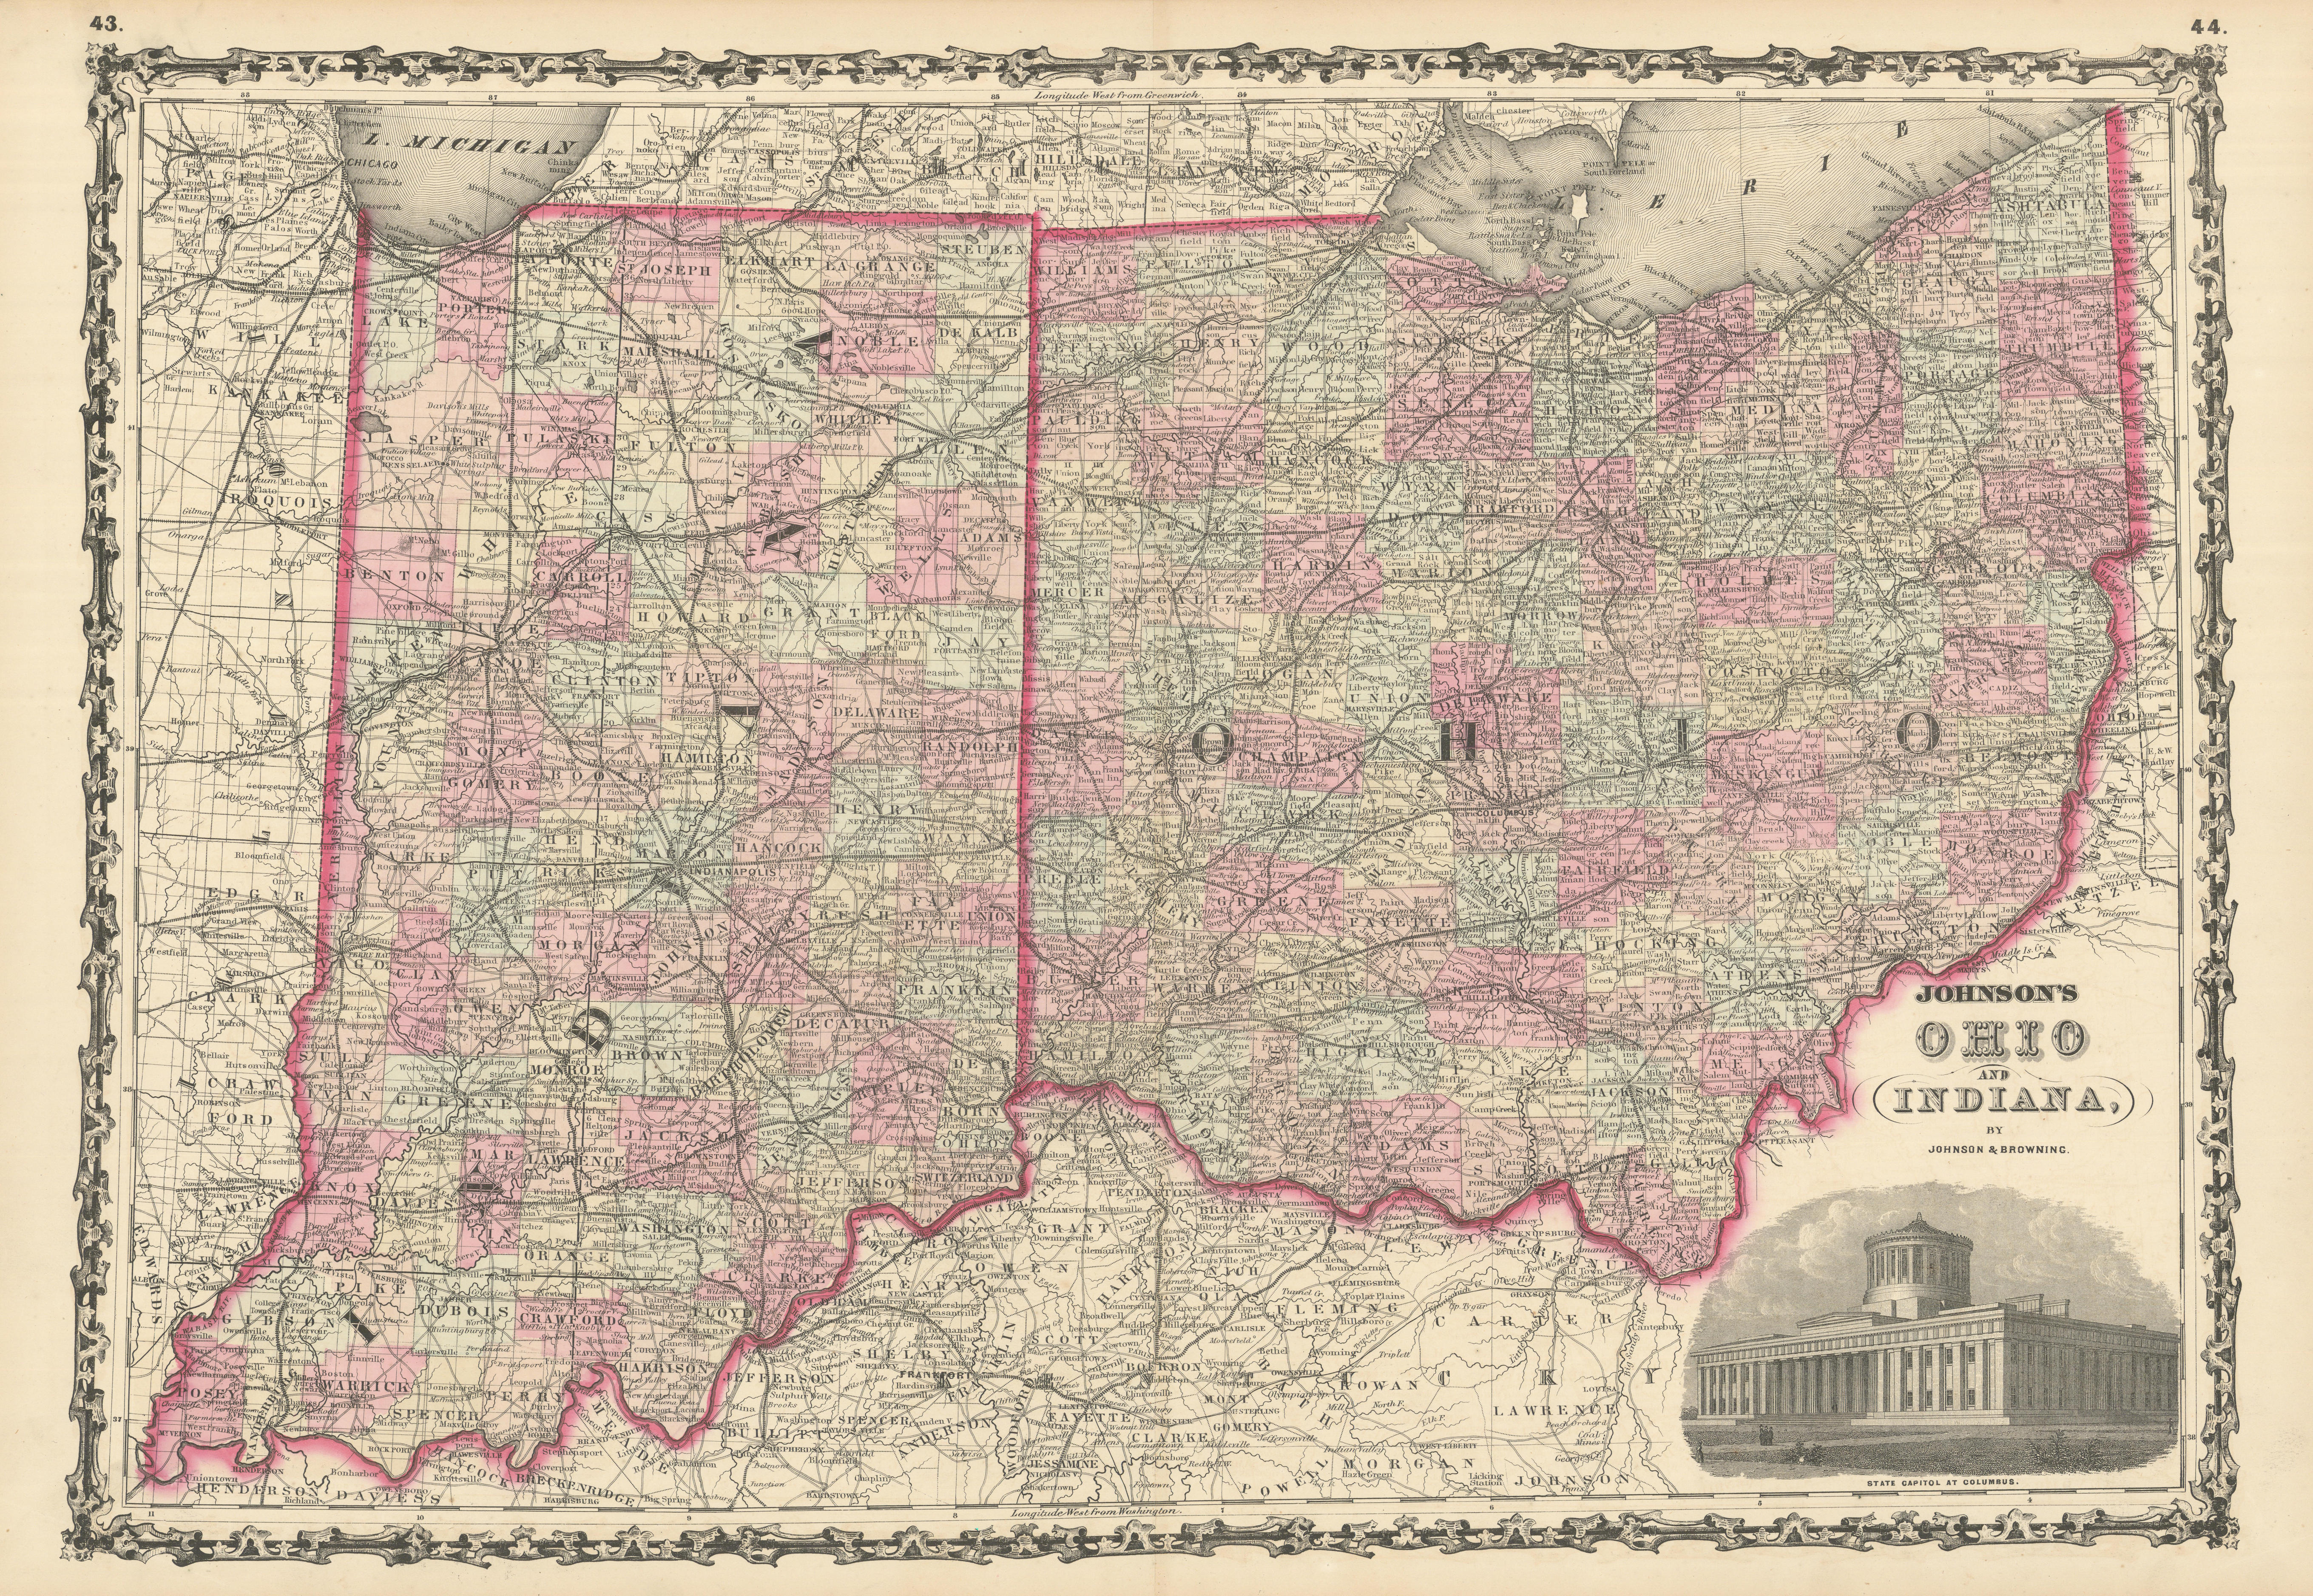 Associate Product Johnson's Ohio & Indiana. US state map showing counties 1861 old antique